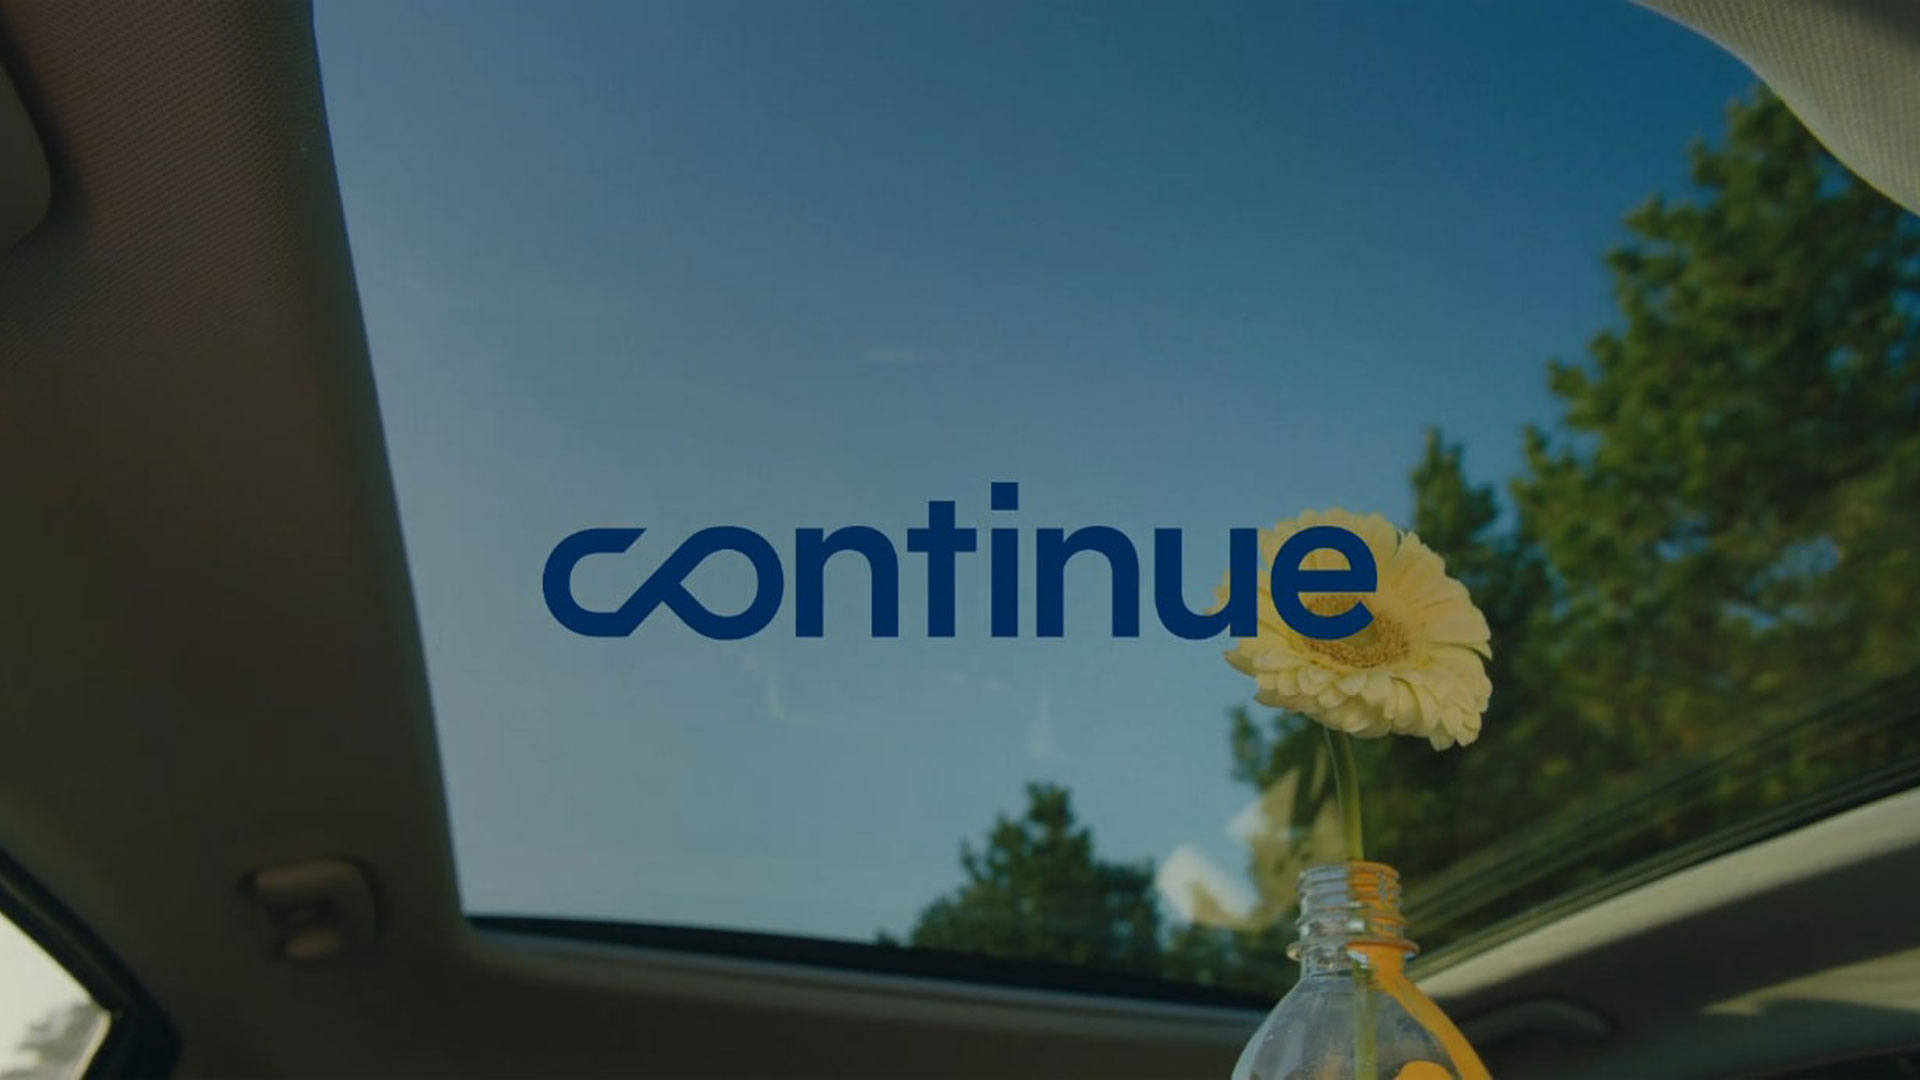 The image of the logo 'Continue', overlapping the yellow flower in a transparent plastic bottle.